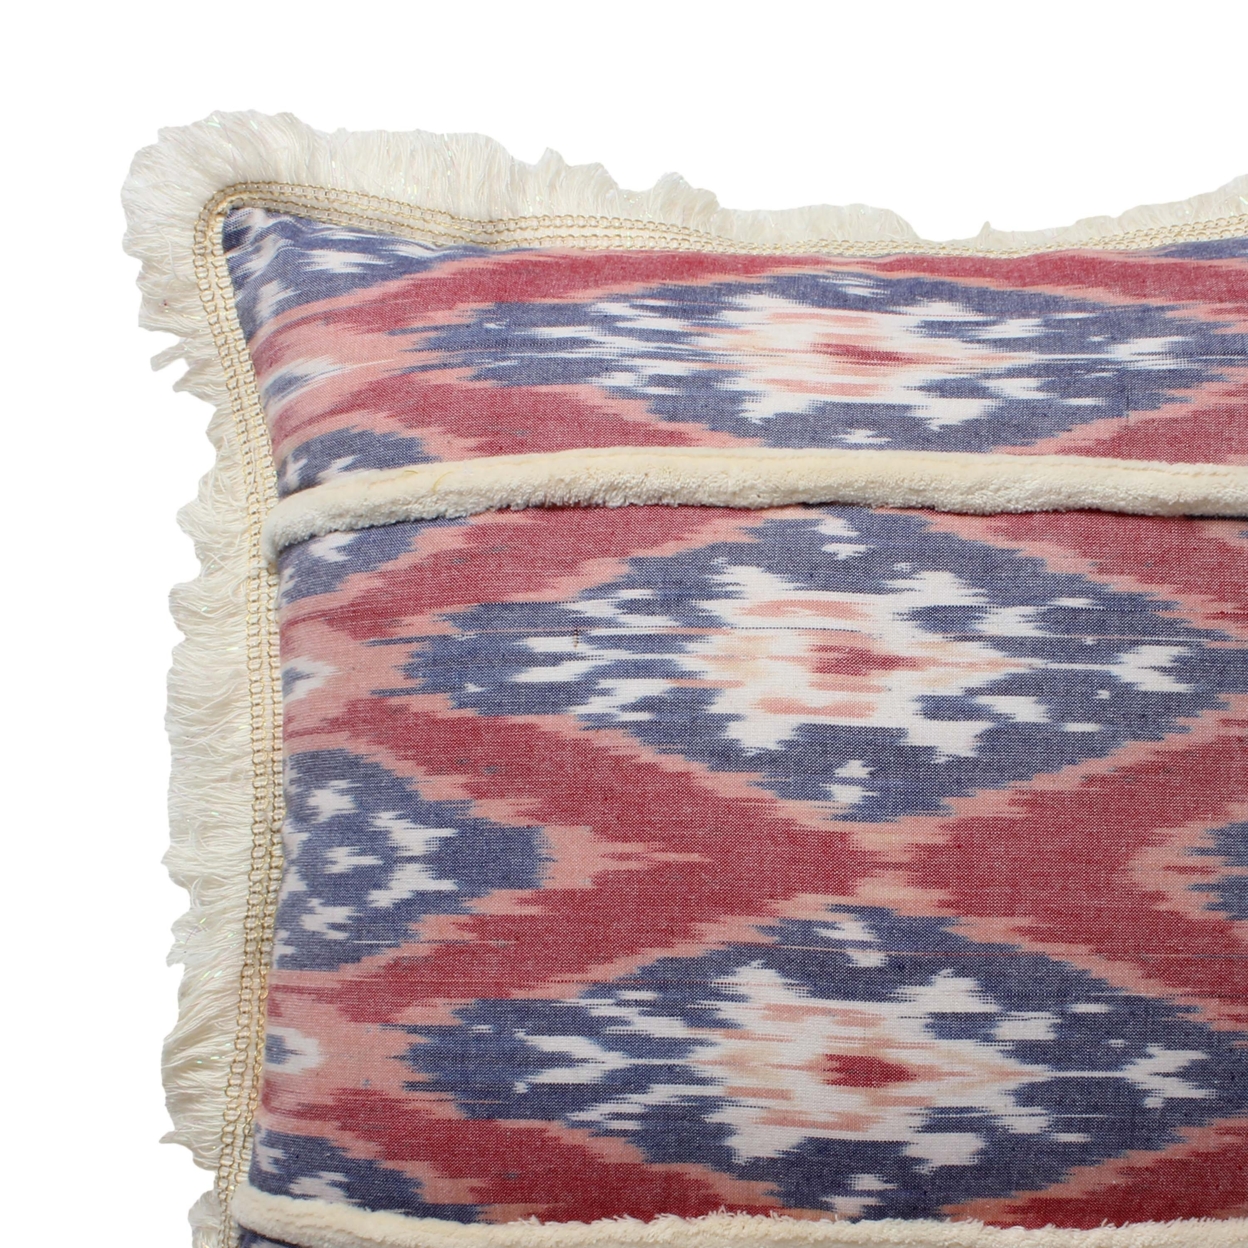 18 X 18 Handcrafted Square Cotton Accent Throw Pillow, Floral Ikat Dyed Pattern, Fringe Accent, Set Of 2, Multicolor